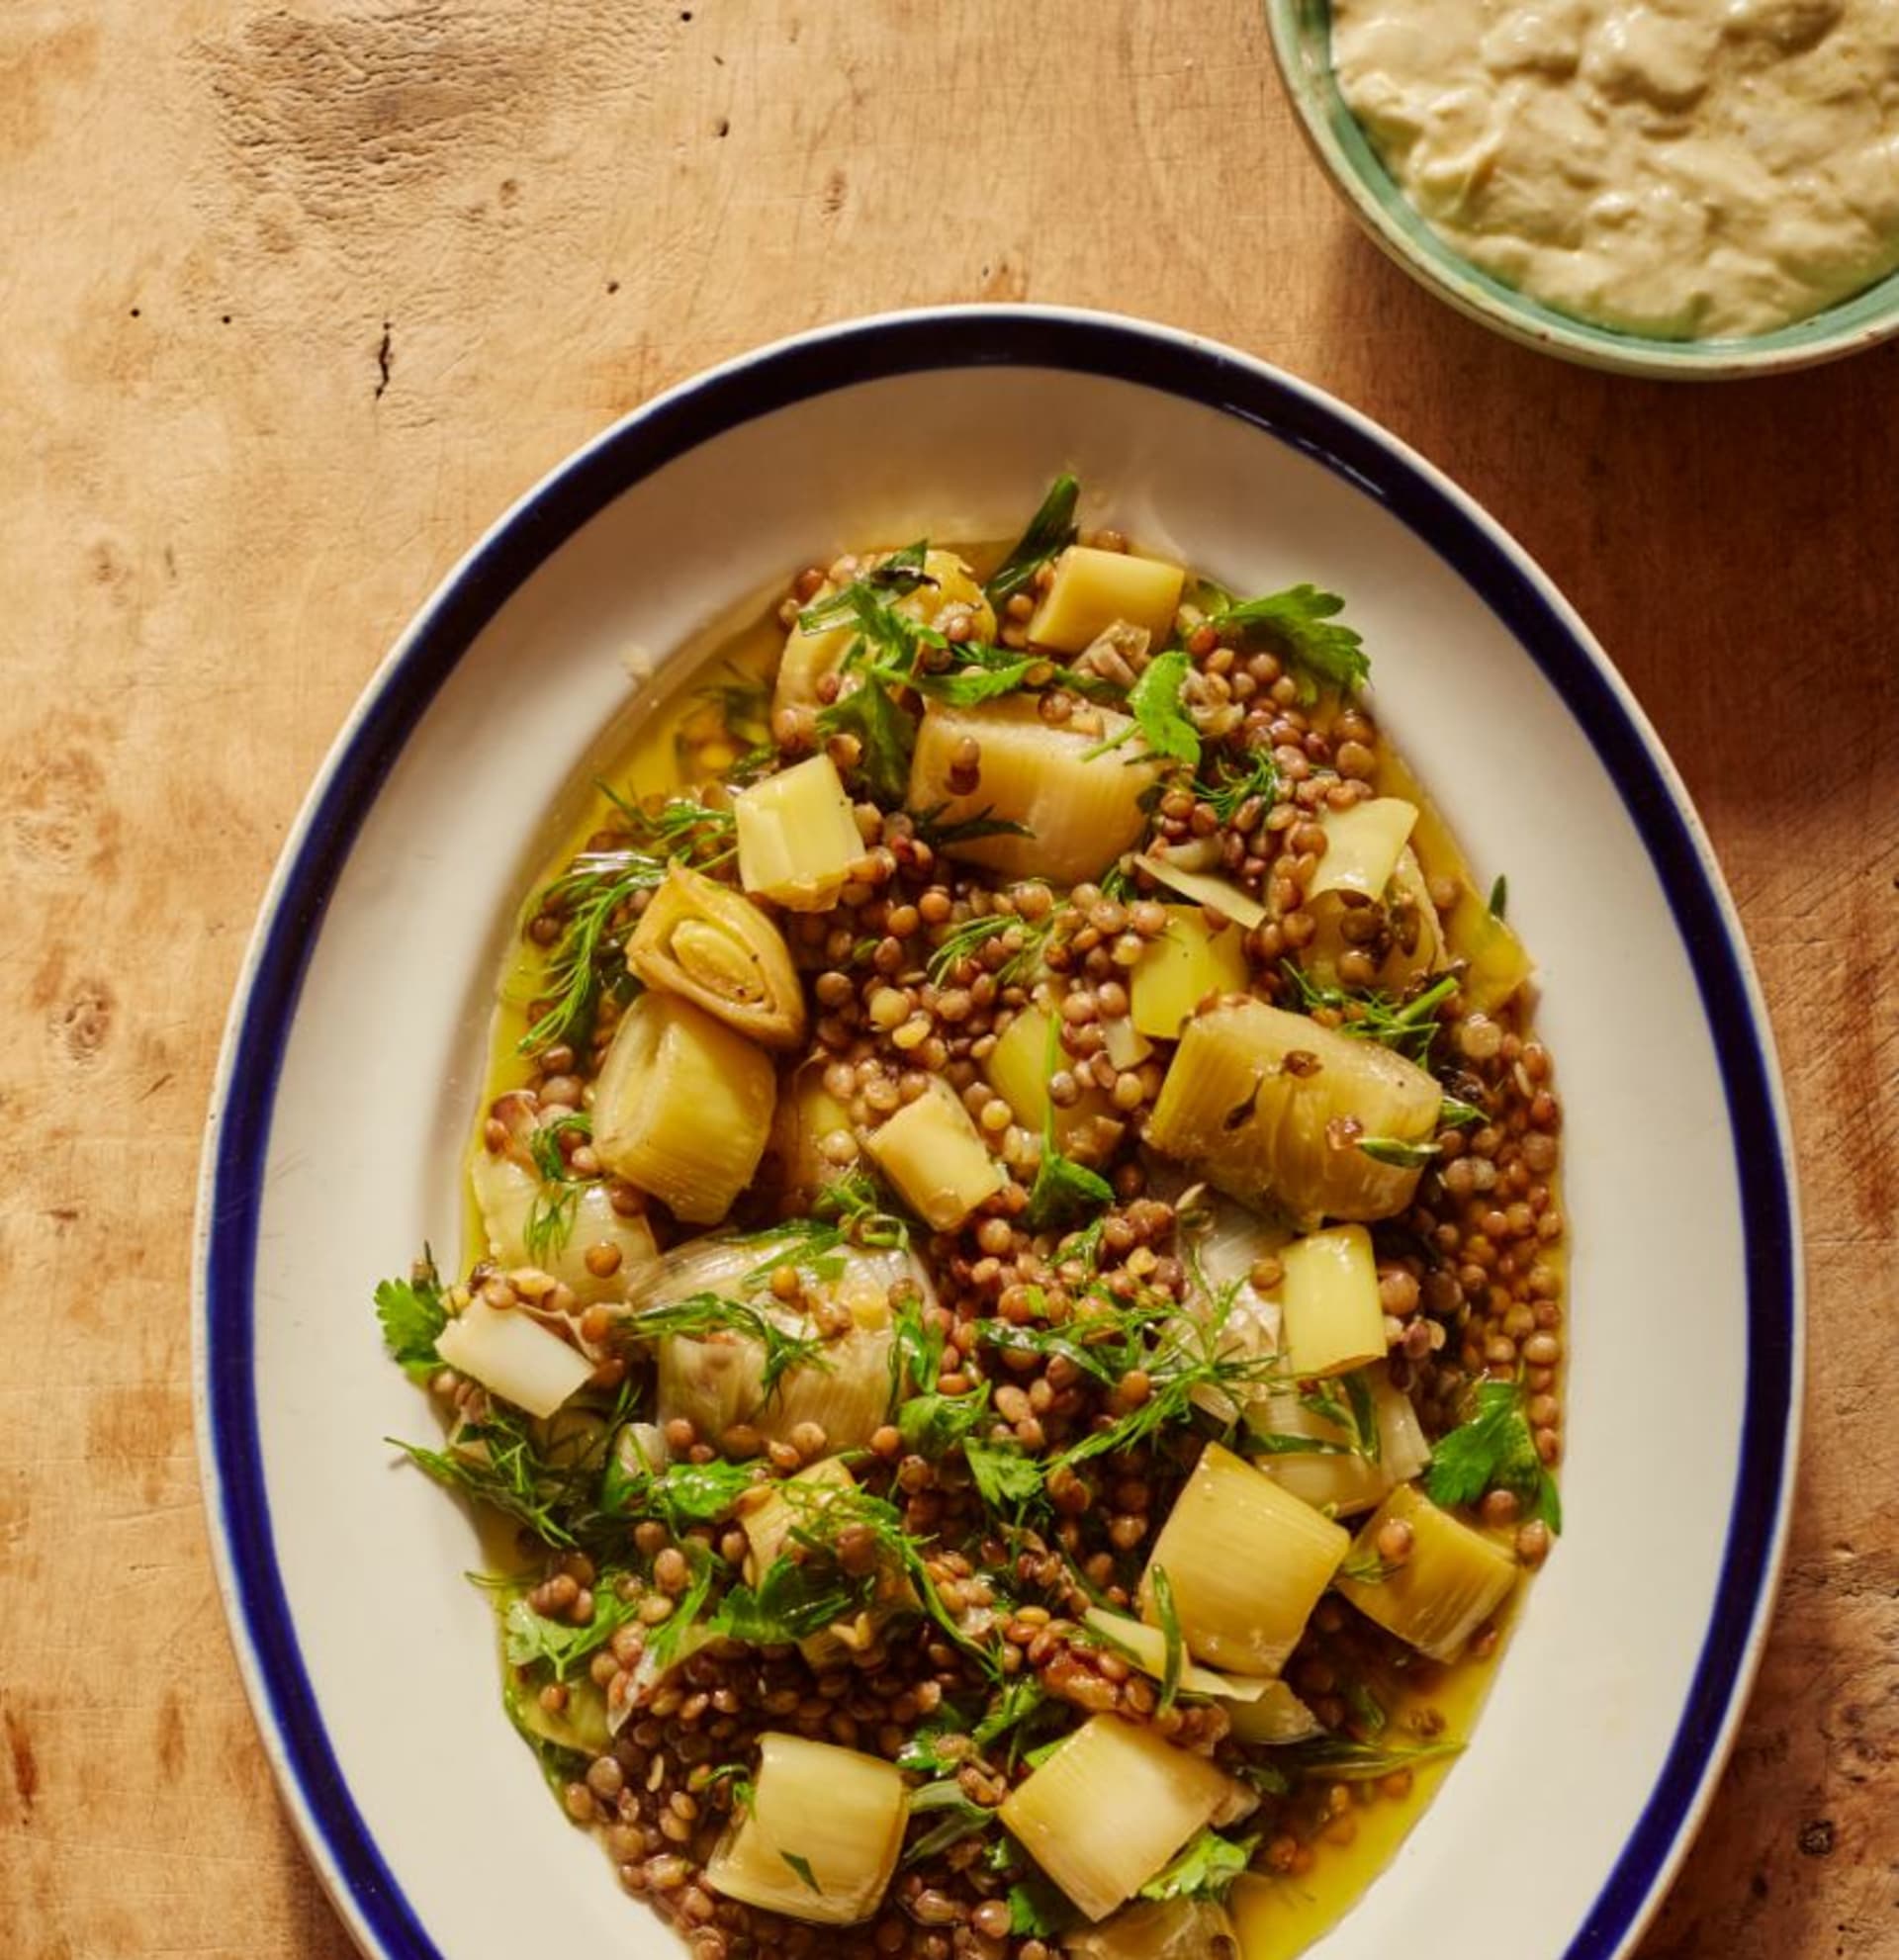 Leek Confit with Puy Lentils and Cream of Shallots, according to Ottolenghi